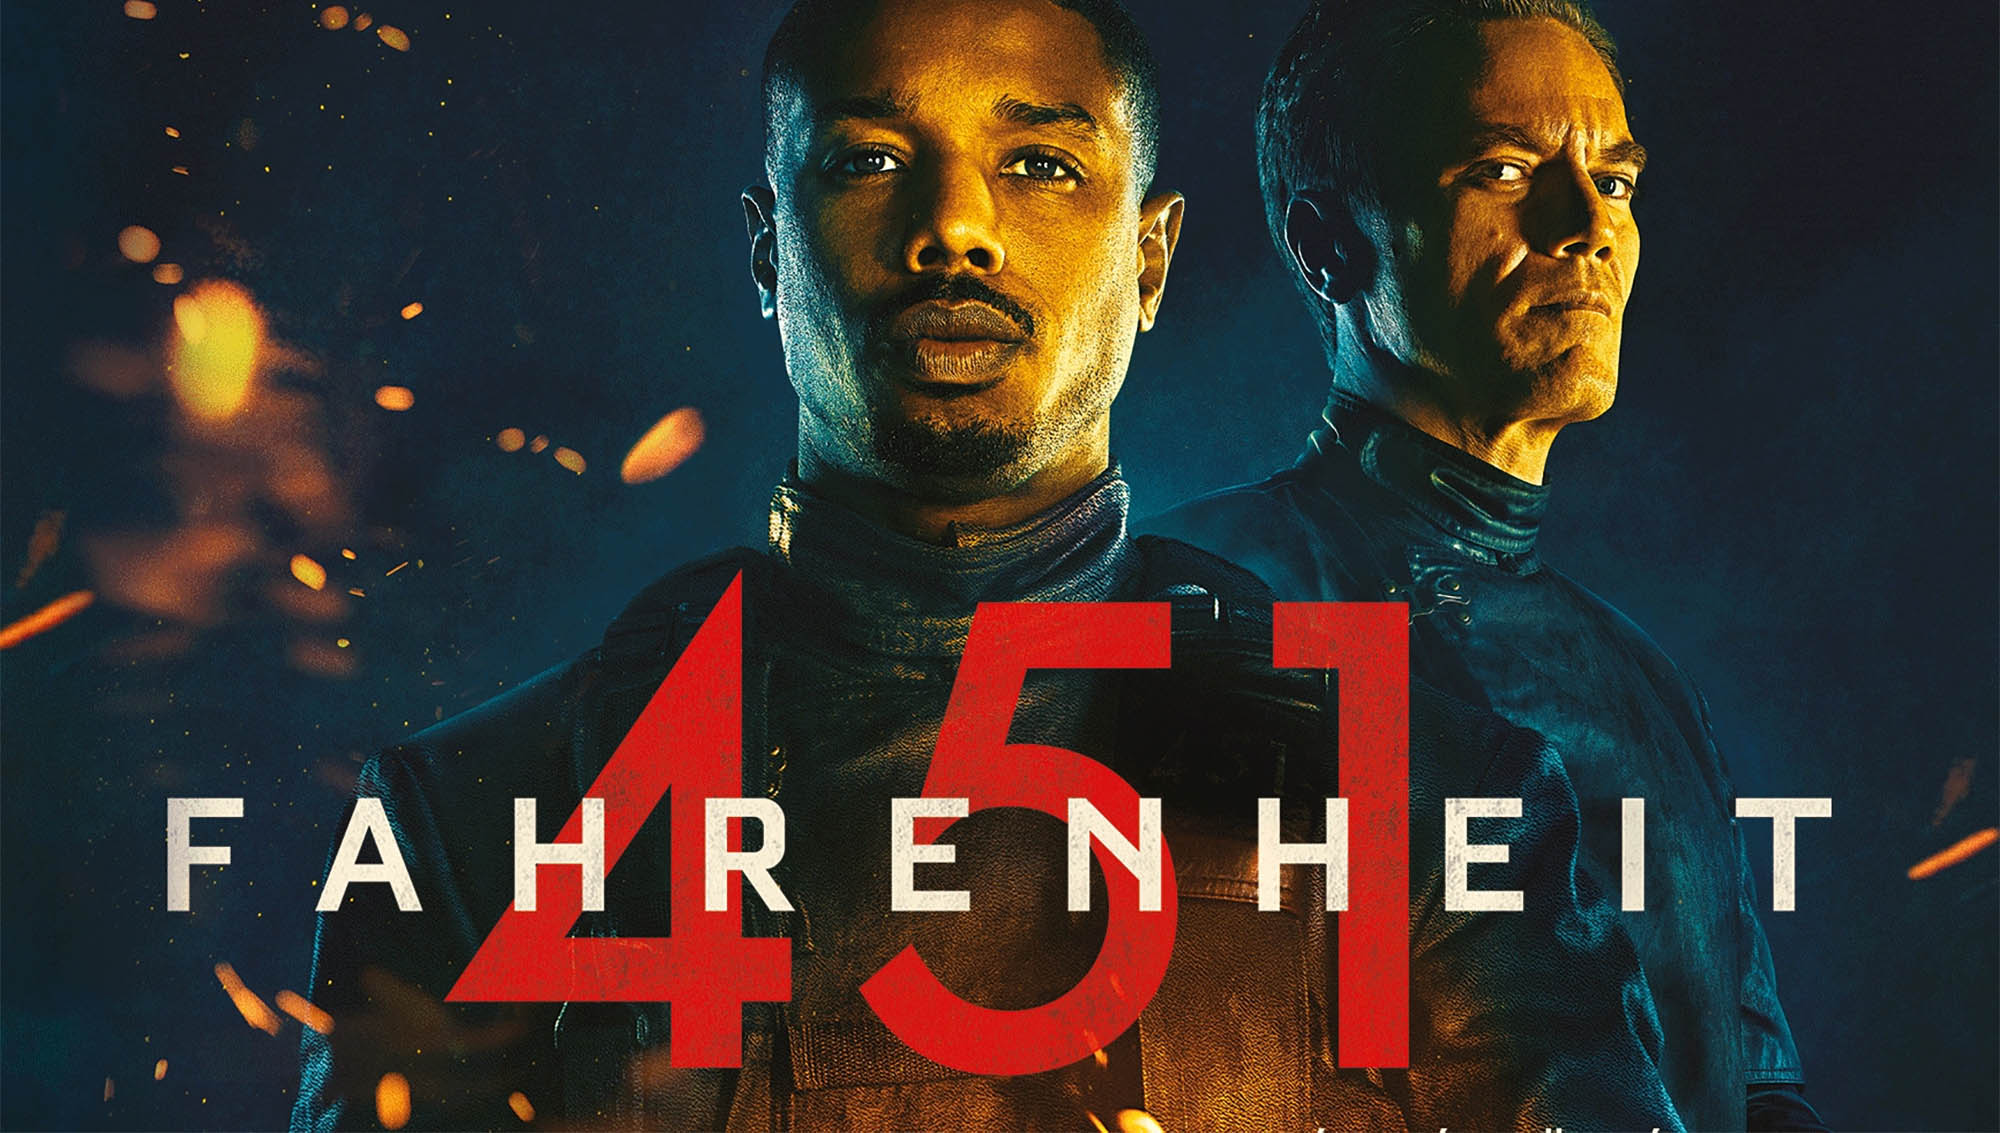 HBO’s 'Fahrenheit 451' bombed last year, but studios could still decide bring more Ray Bradbury to the screen. These works might just come next.